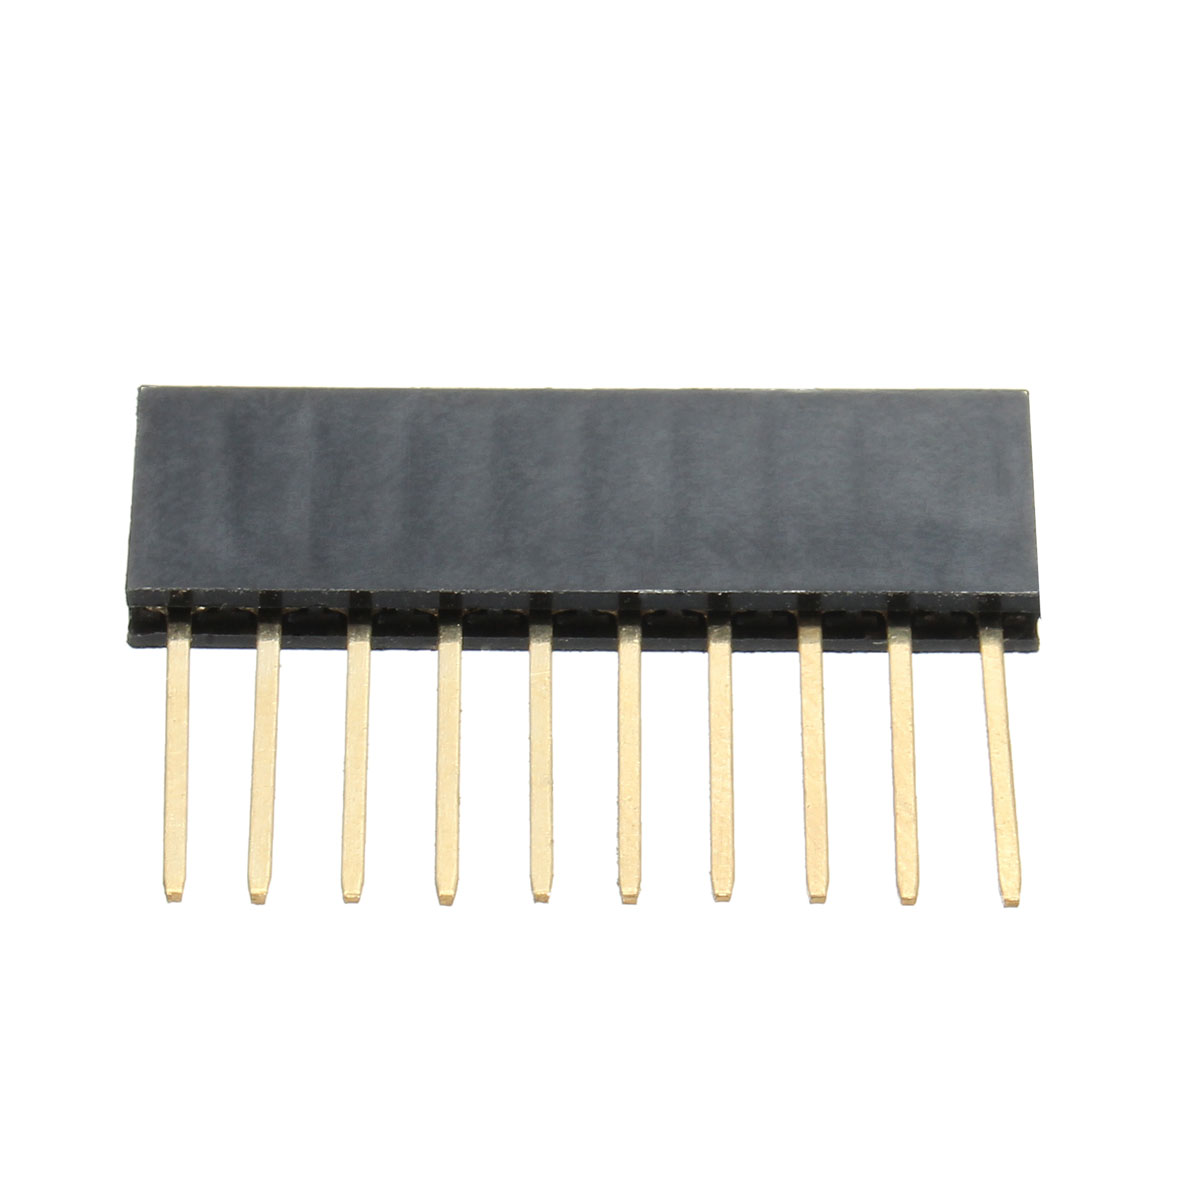 20pcs-10P-254MM-Stackable-Long-Connector-Female-Pin-Header-1324540